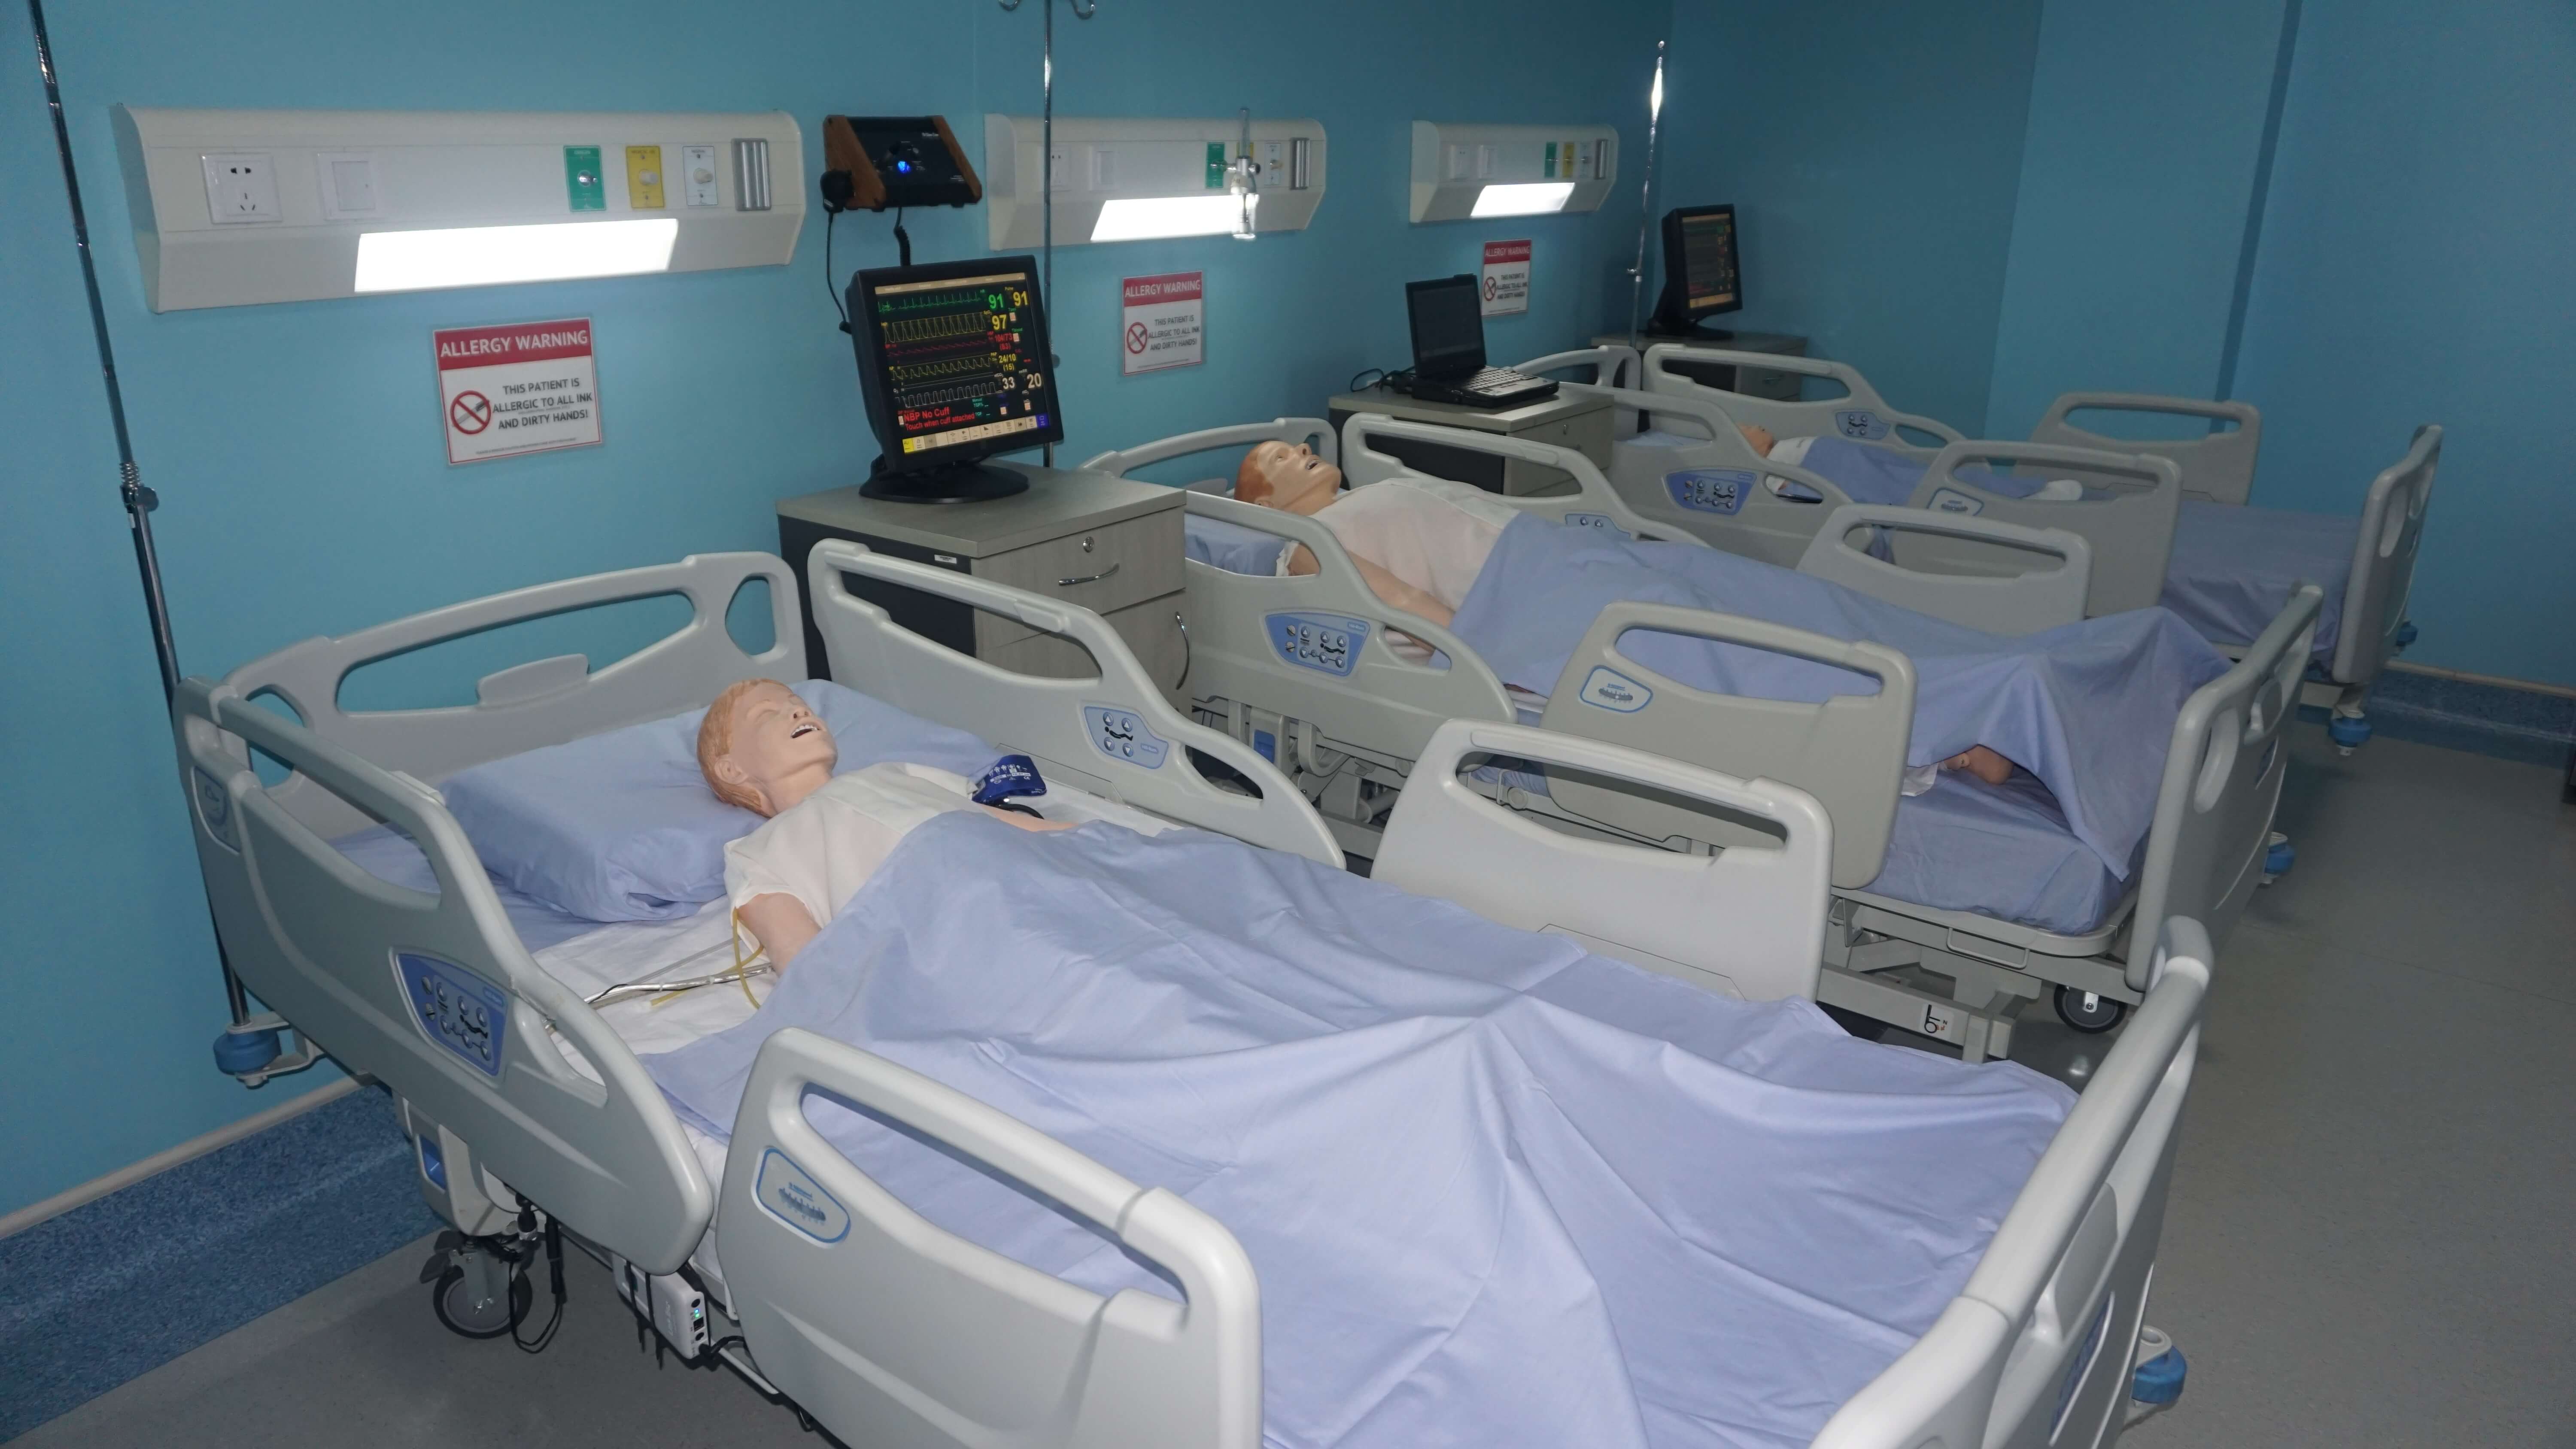 The-first-medical-college-in-the-Philippines-to-set-up-Simulation-Mannequins-DMSF